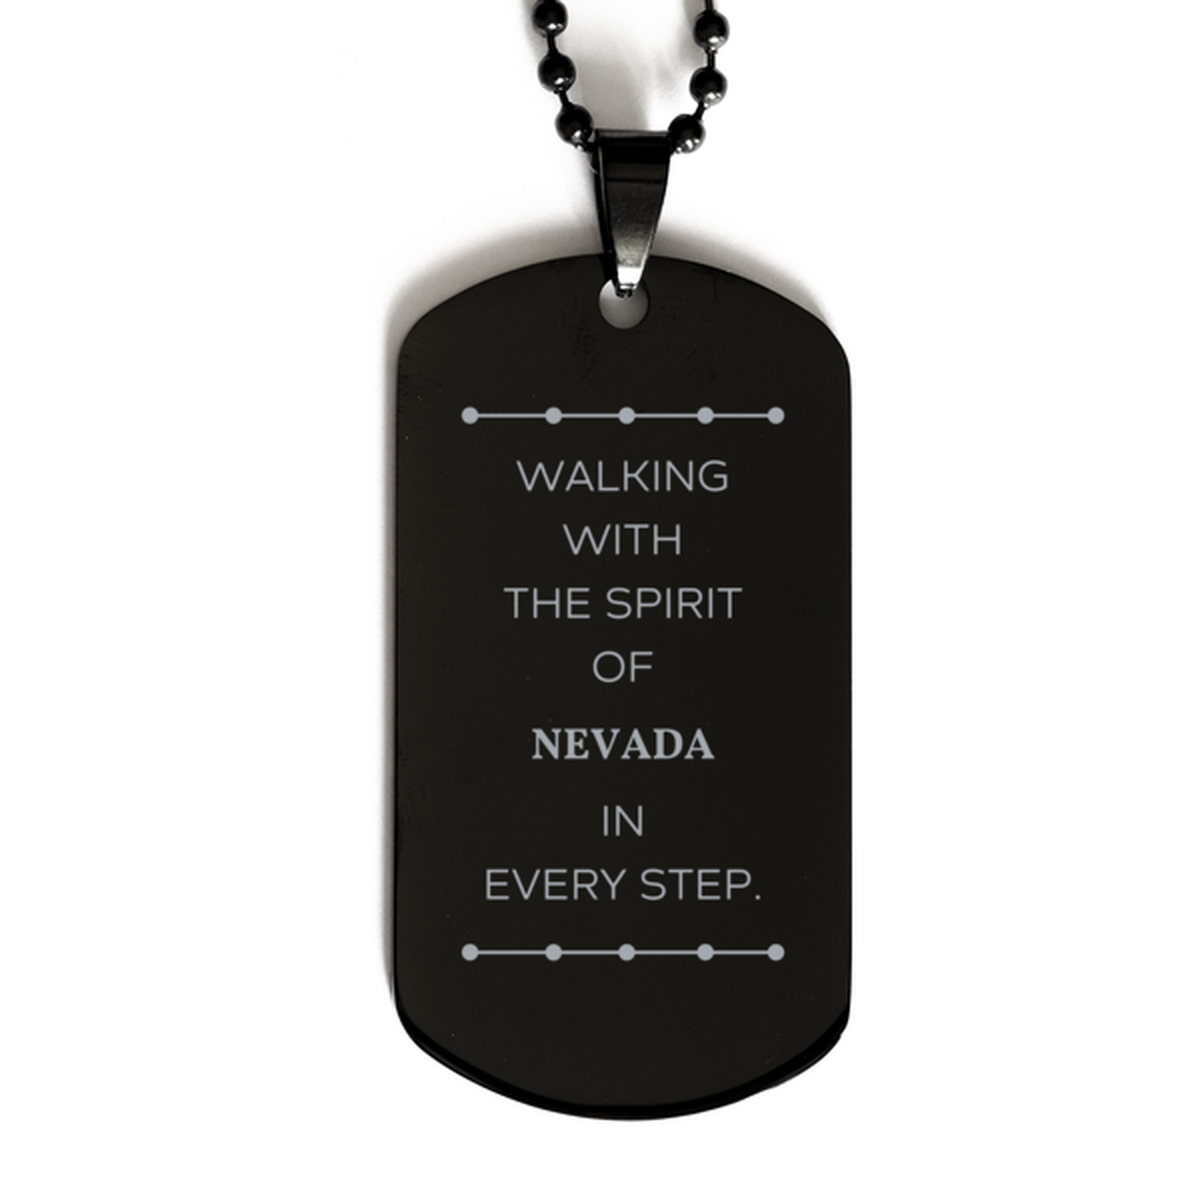 Nevada Gifts, Walking with the spirit, Love Nevada Birthday Christmas Black Dog Tag For Nevada People, Men, Women, Friends